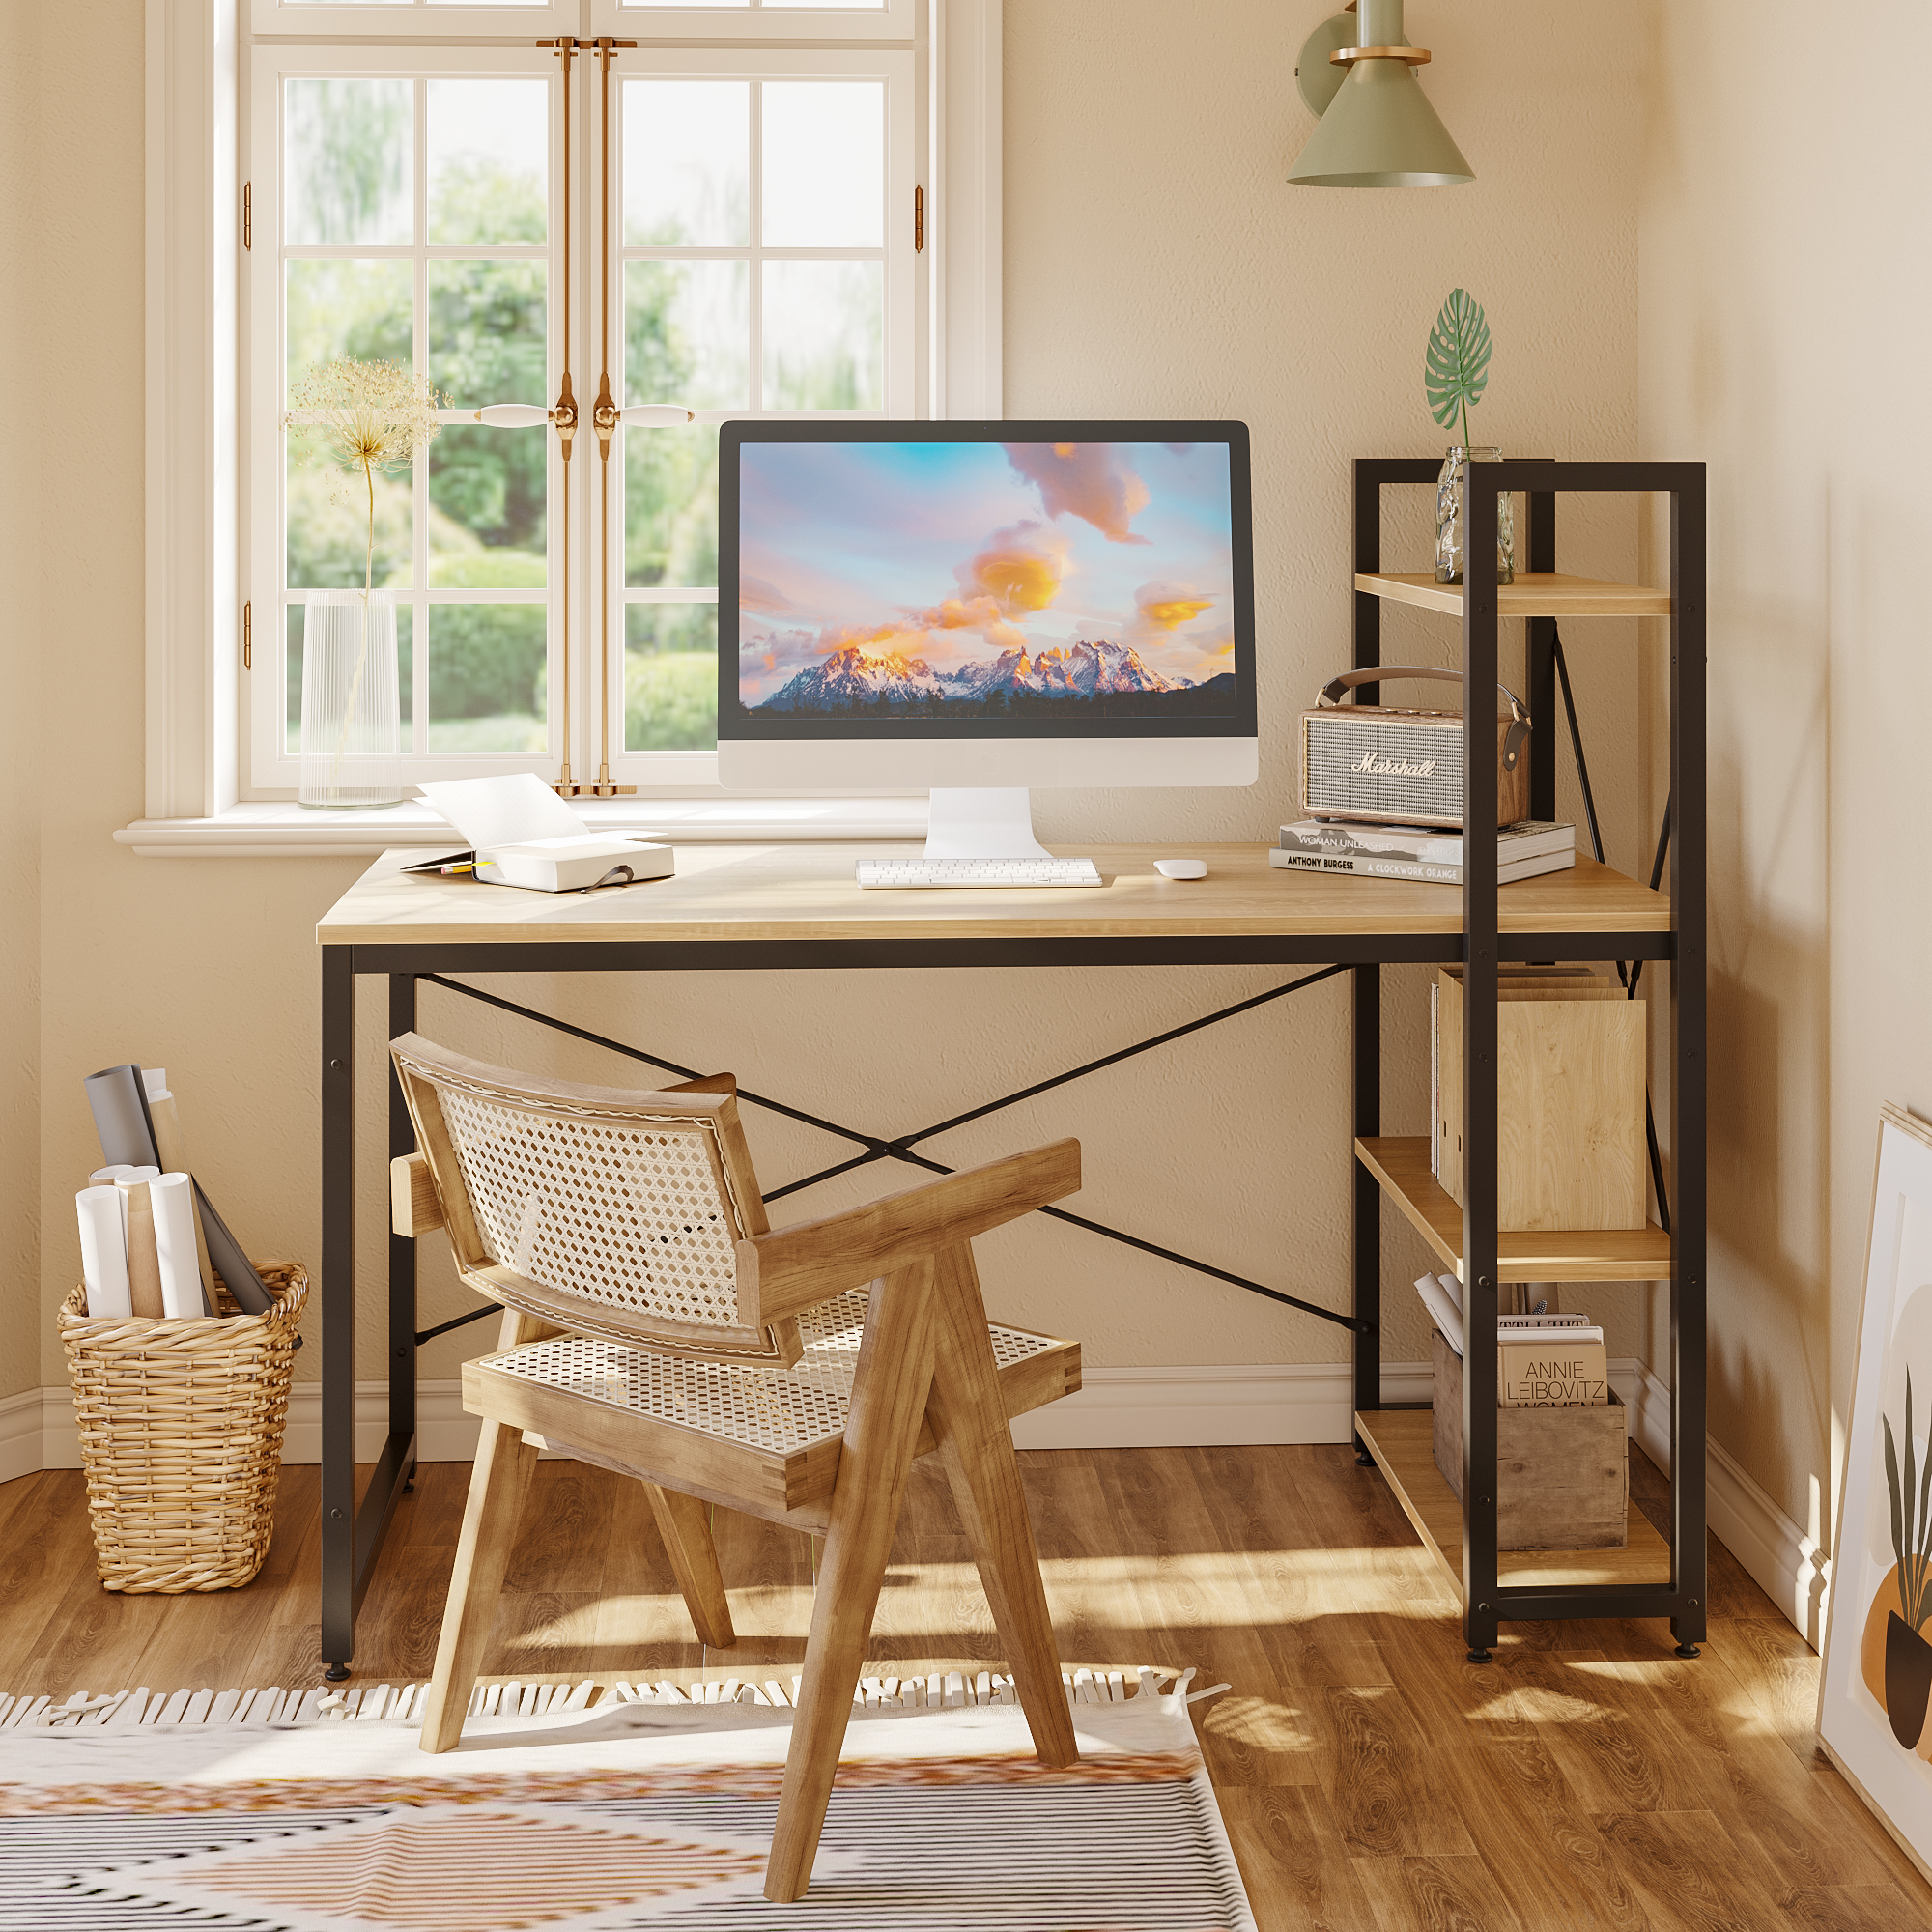 Bestier 55 inch Computer Desk with 4-Tier Shelves Craft Table Writing Study Table, Oak - image 1 of 10